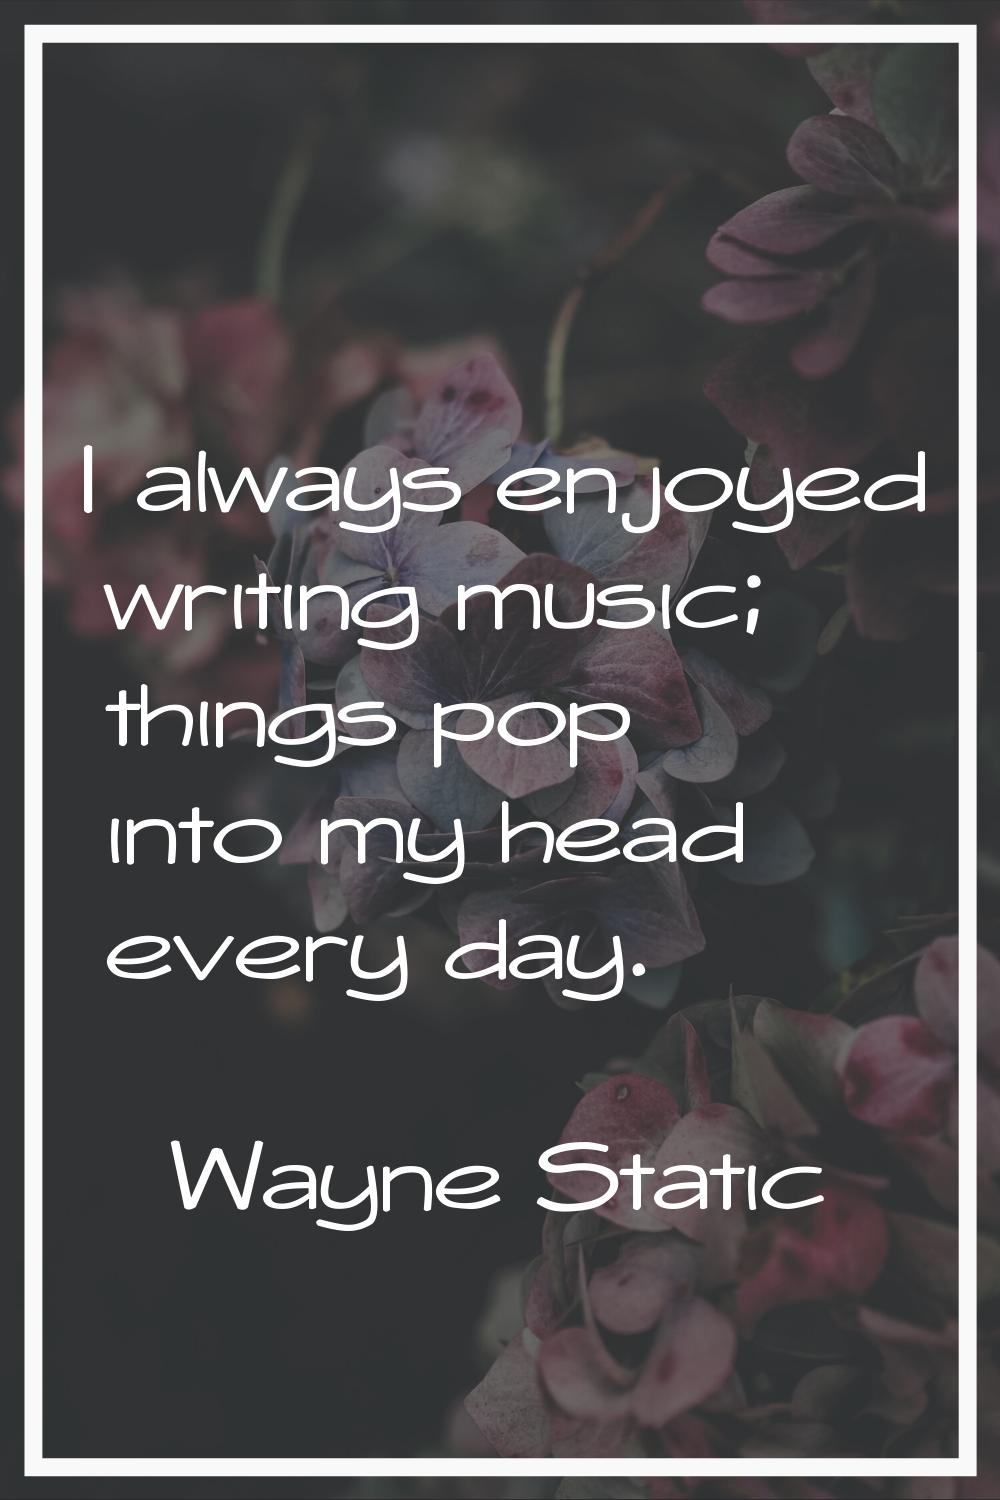 I always enjoyed writing music; things pop into my head every day.